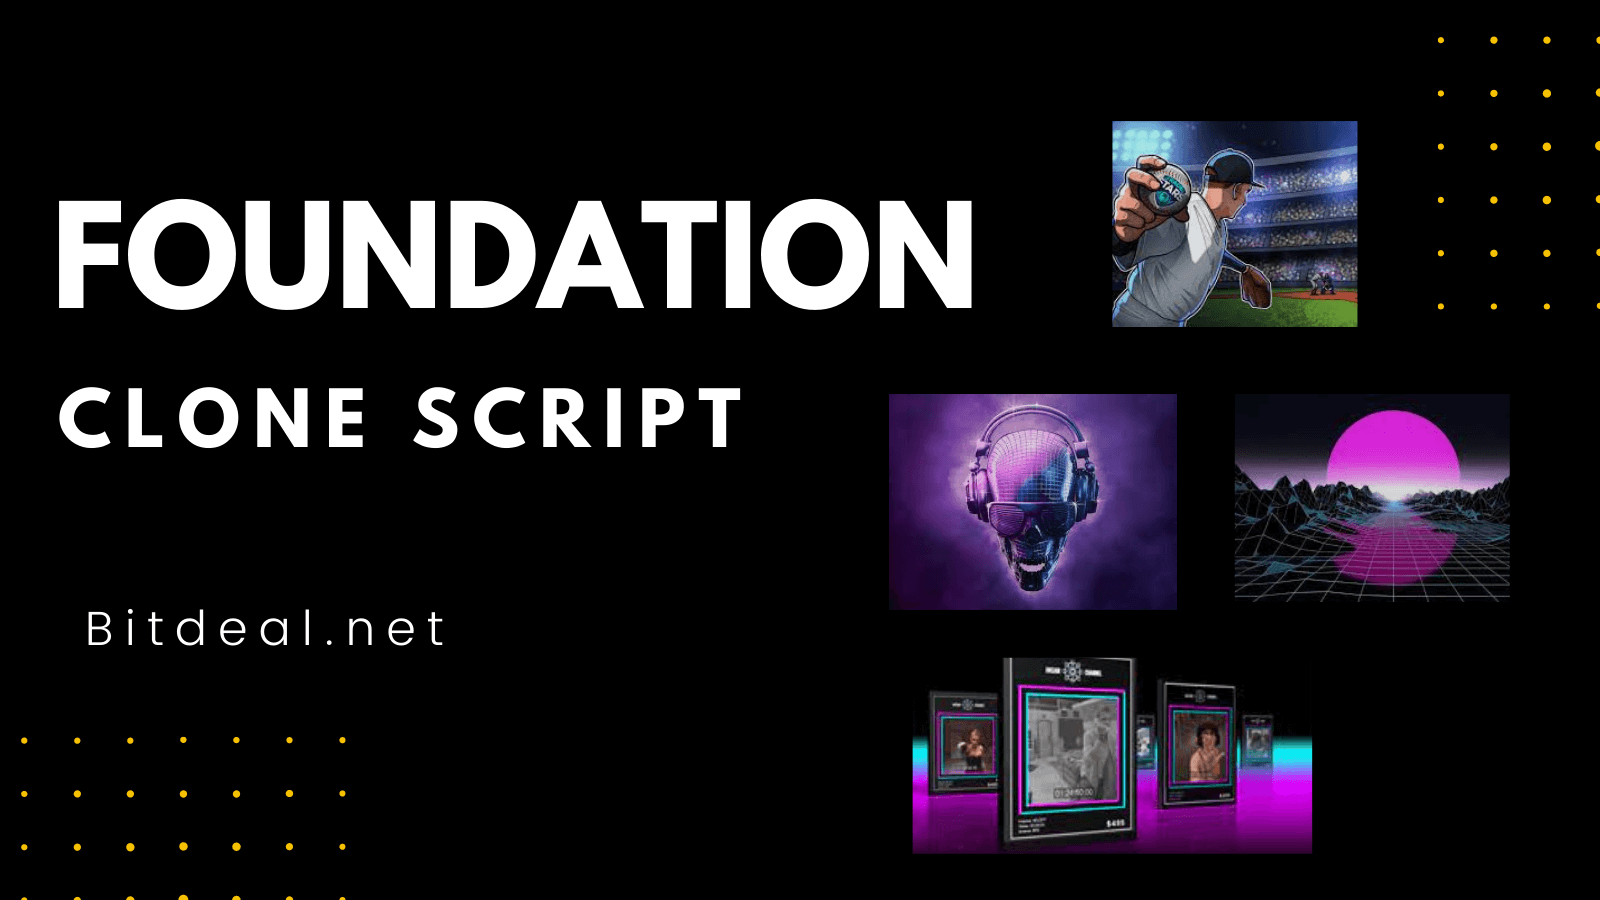 Foundation Clone Script - The Perfect Strategy to build a lucrative NFT Marketplace like Foundation